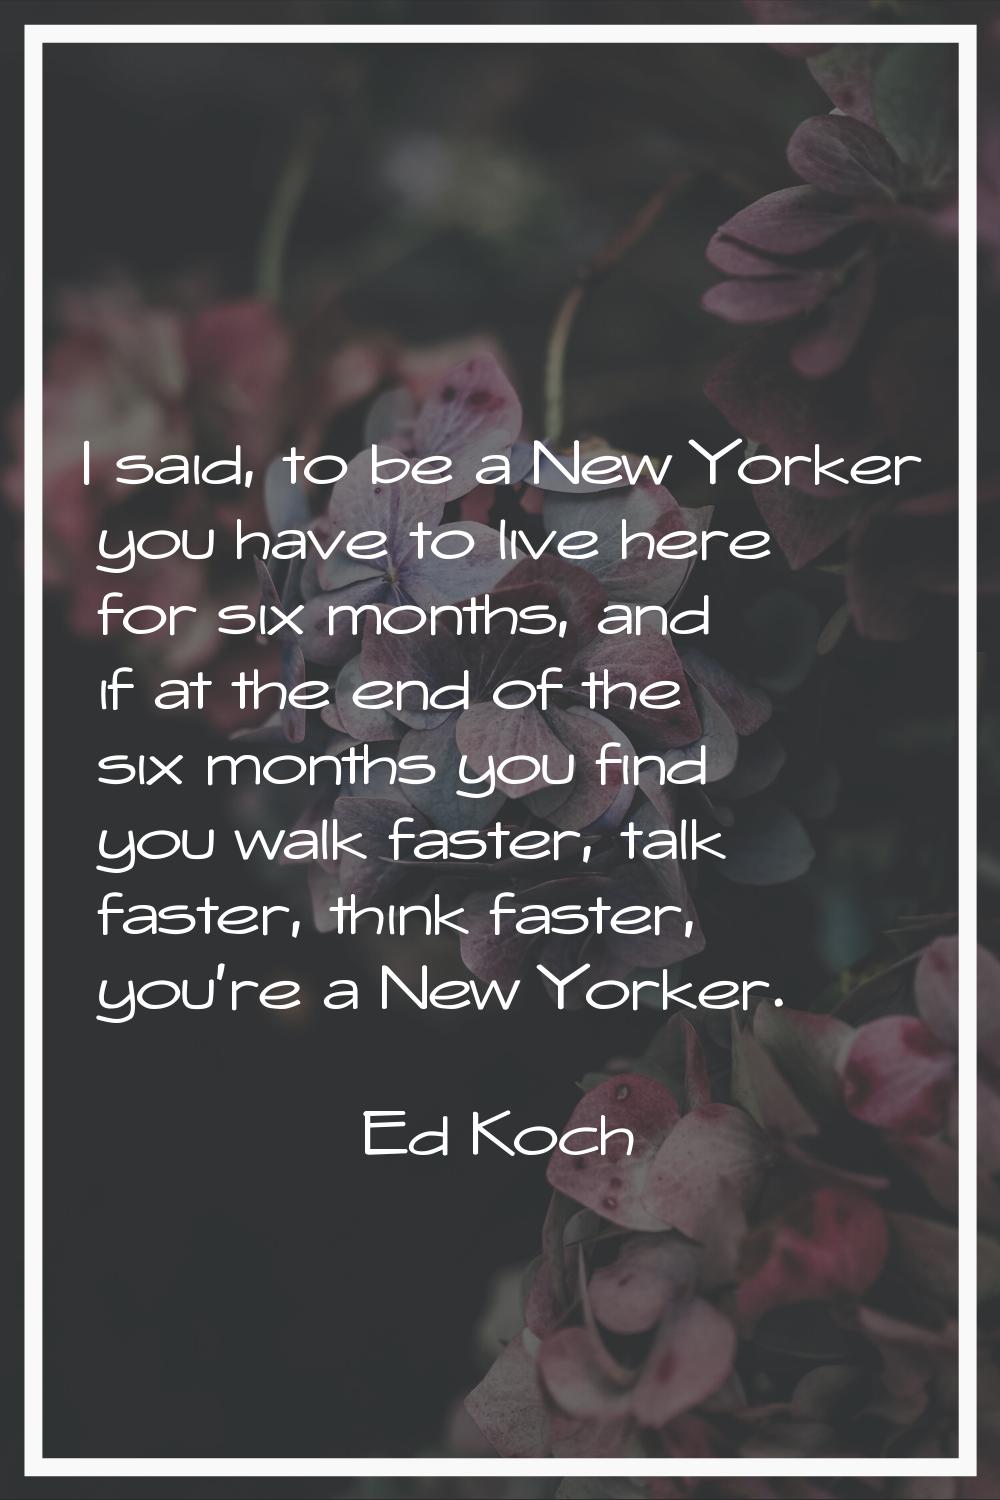 I said, to be a New Yorker you have to live here for six months, and if at the end of the six month